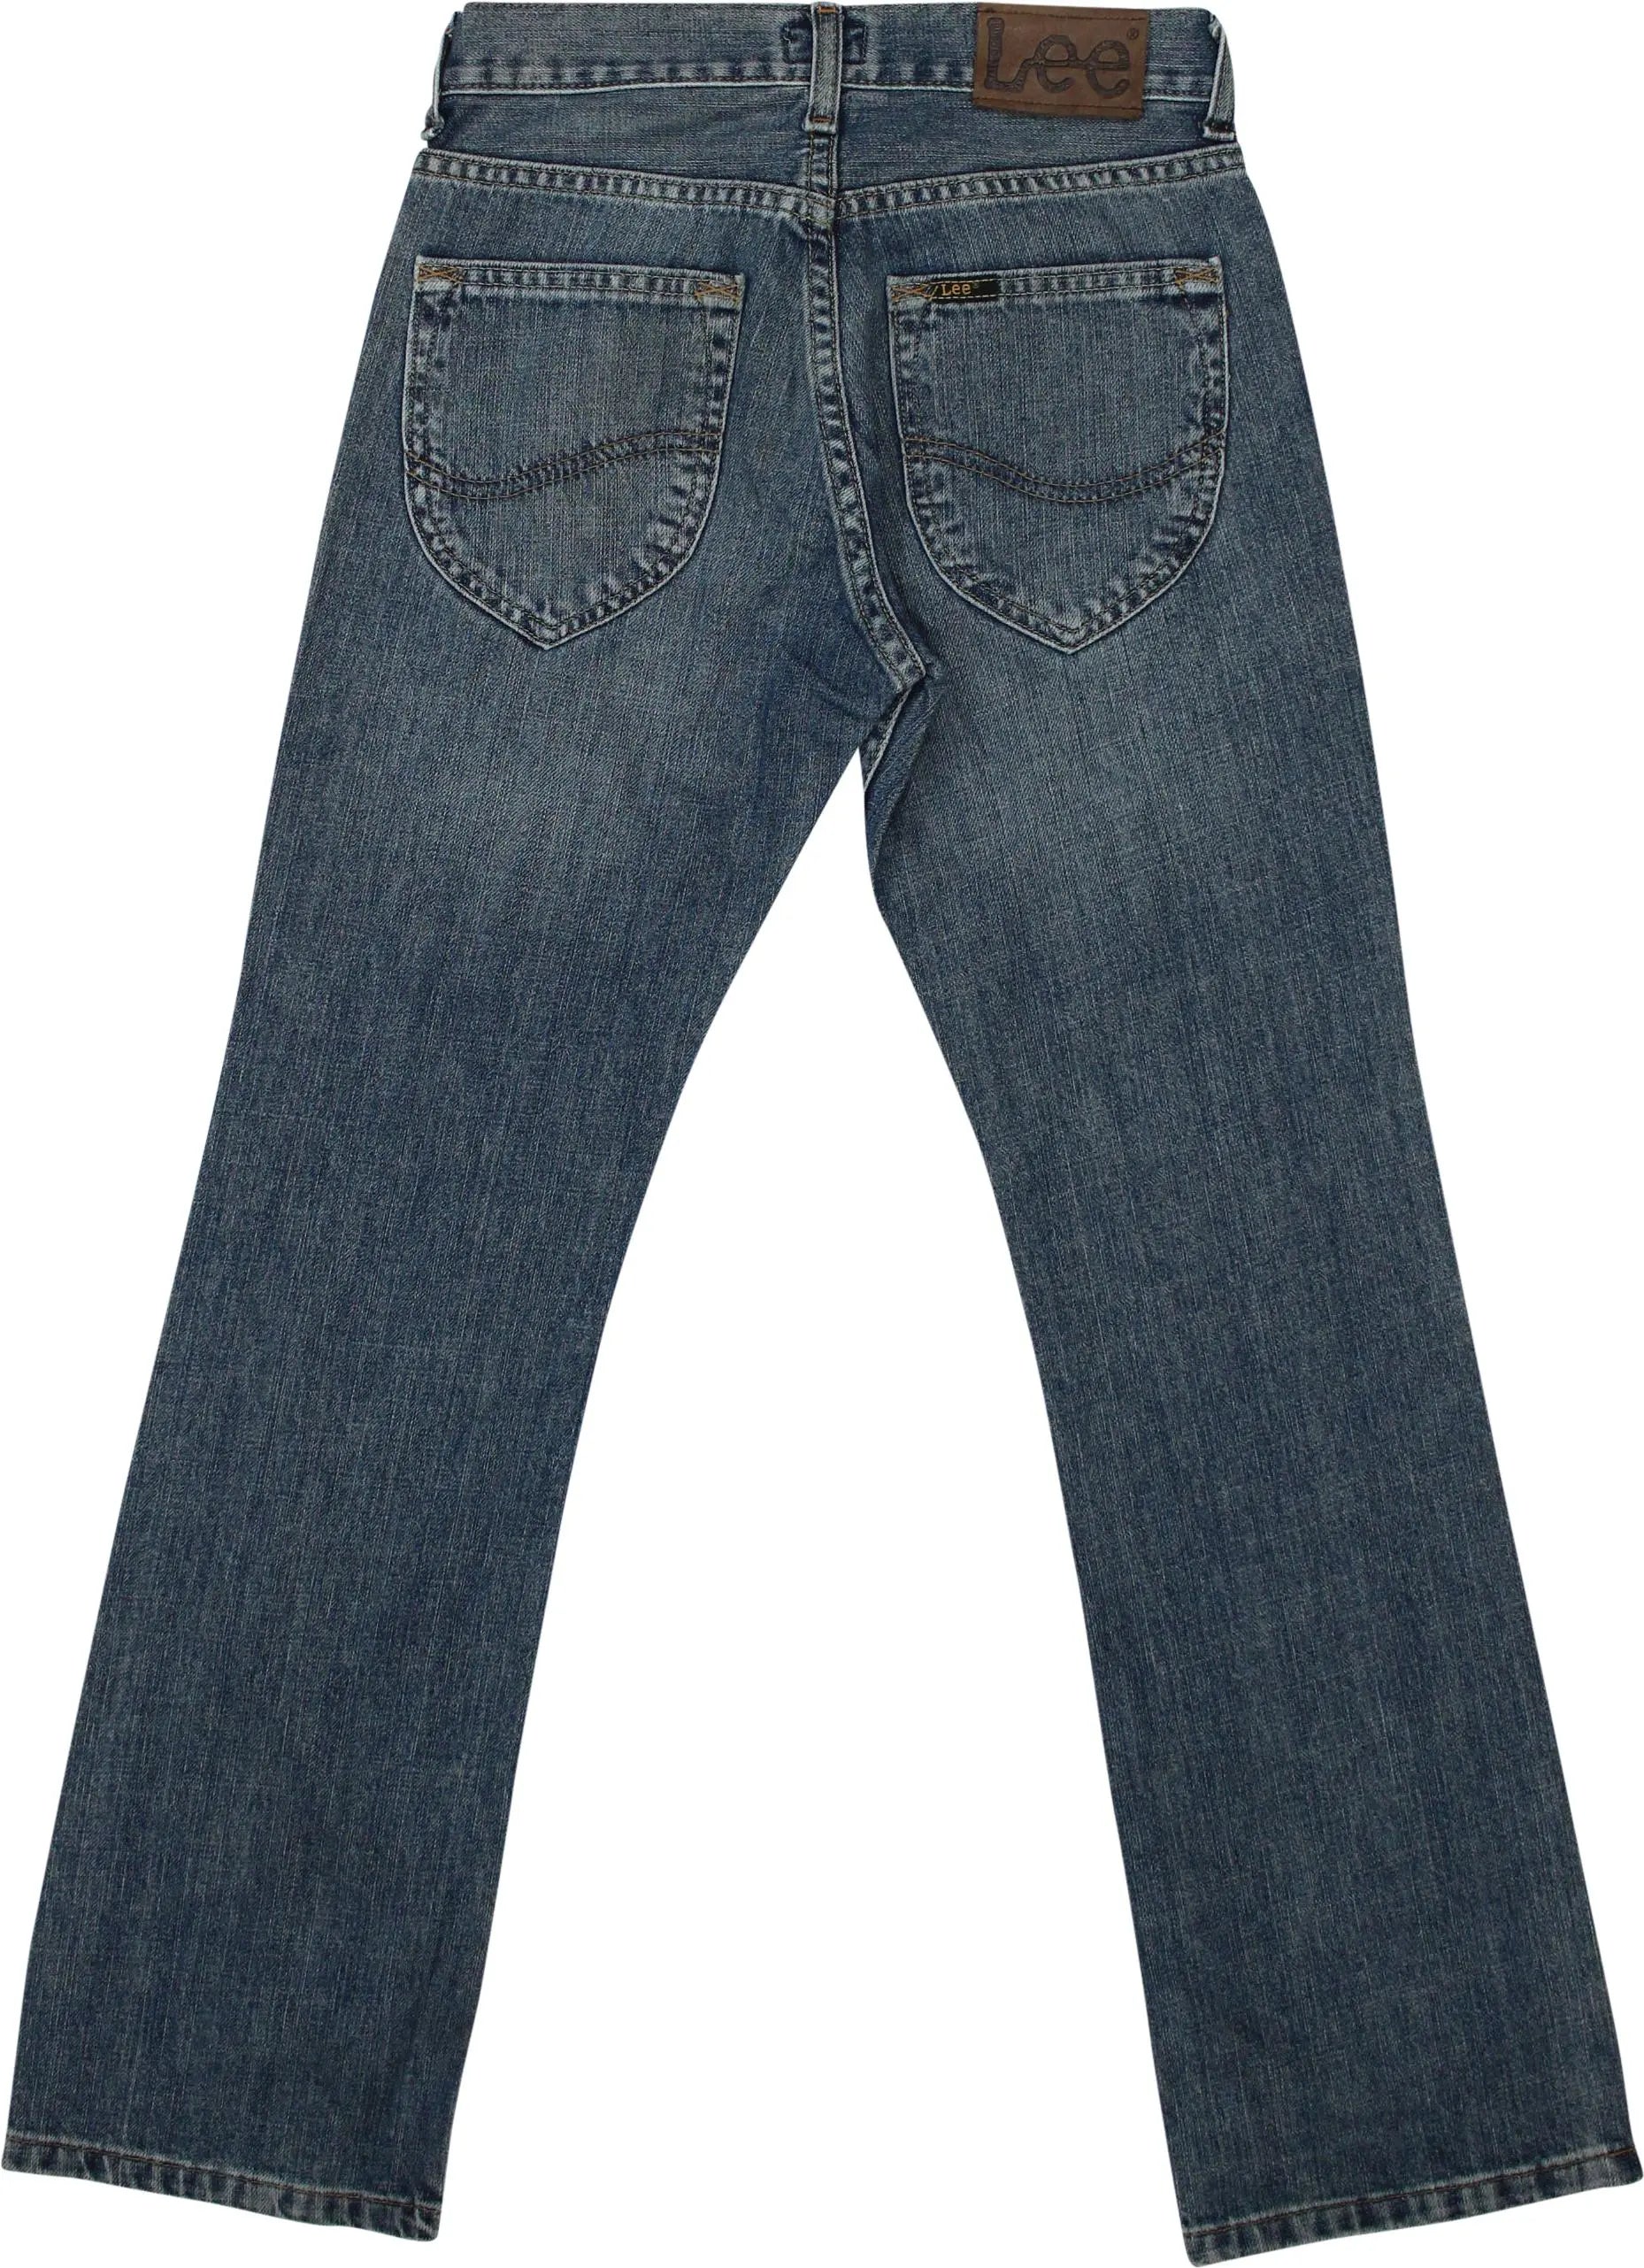 Lee - Regular Jeans by Lee- ThriftTale.com - Vintage and second handclothing